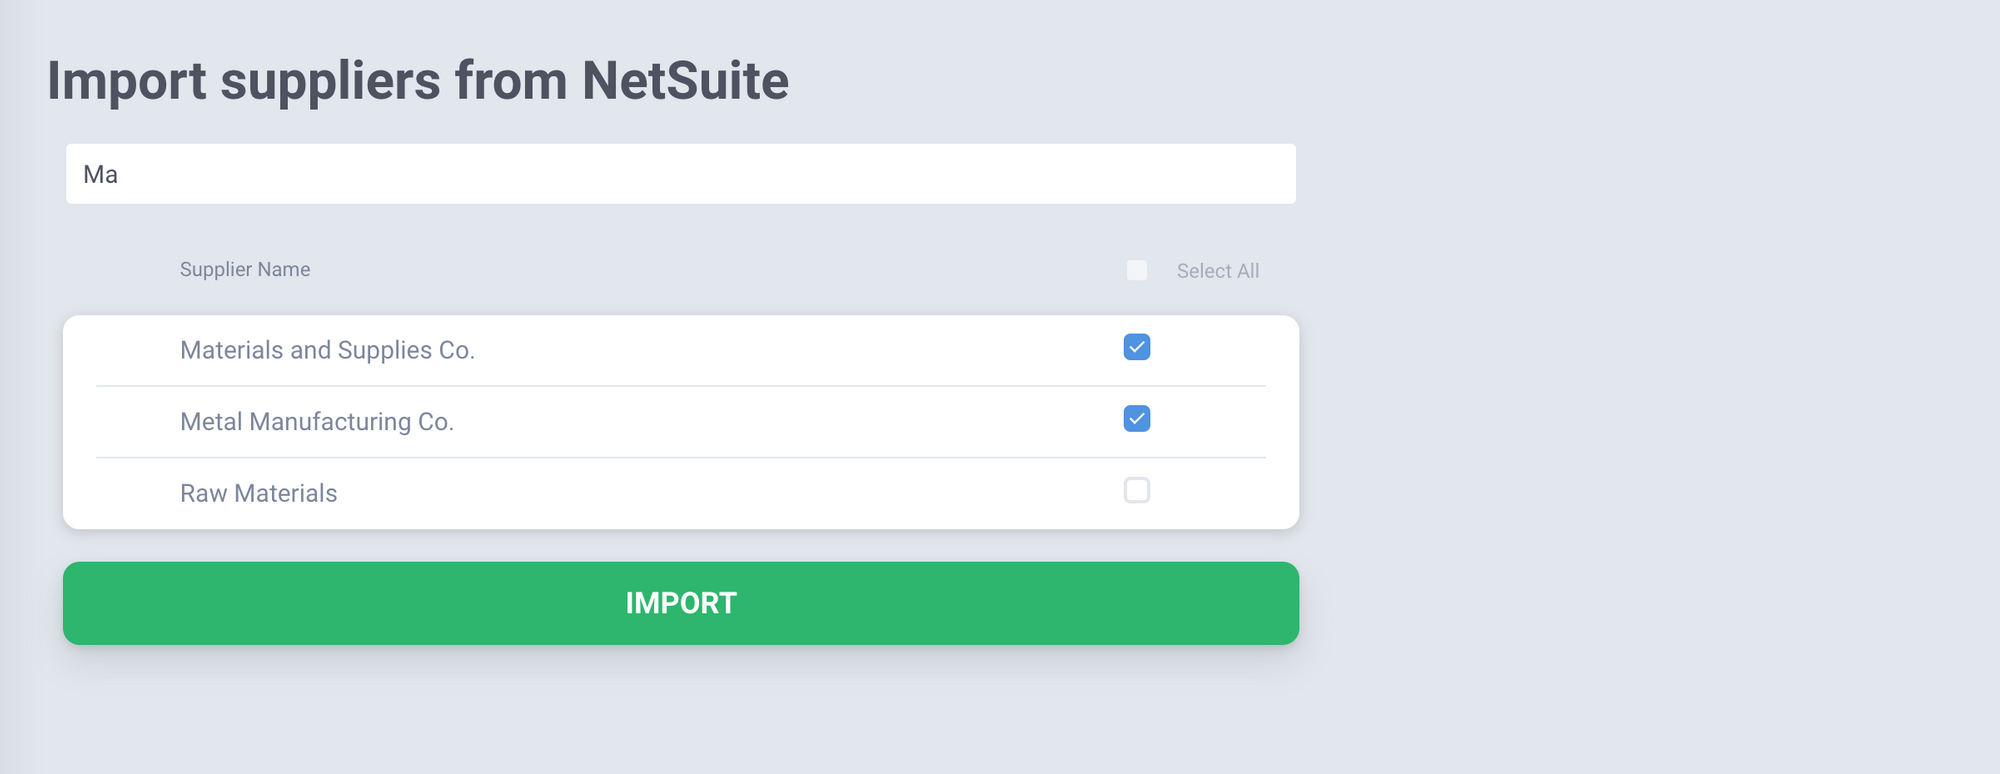 precoro importing suppliers from netsuite